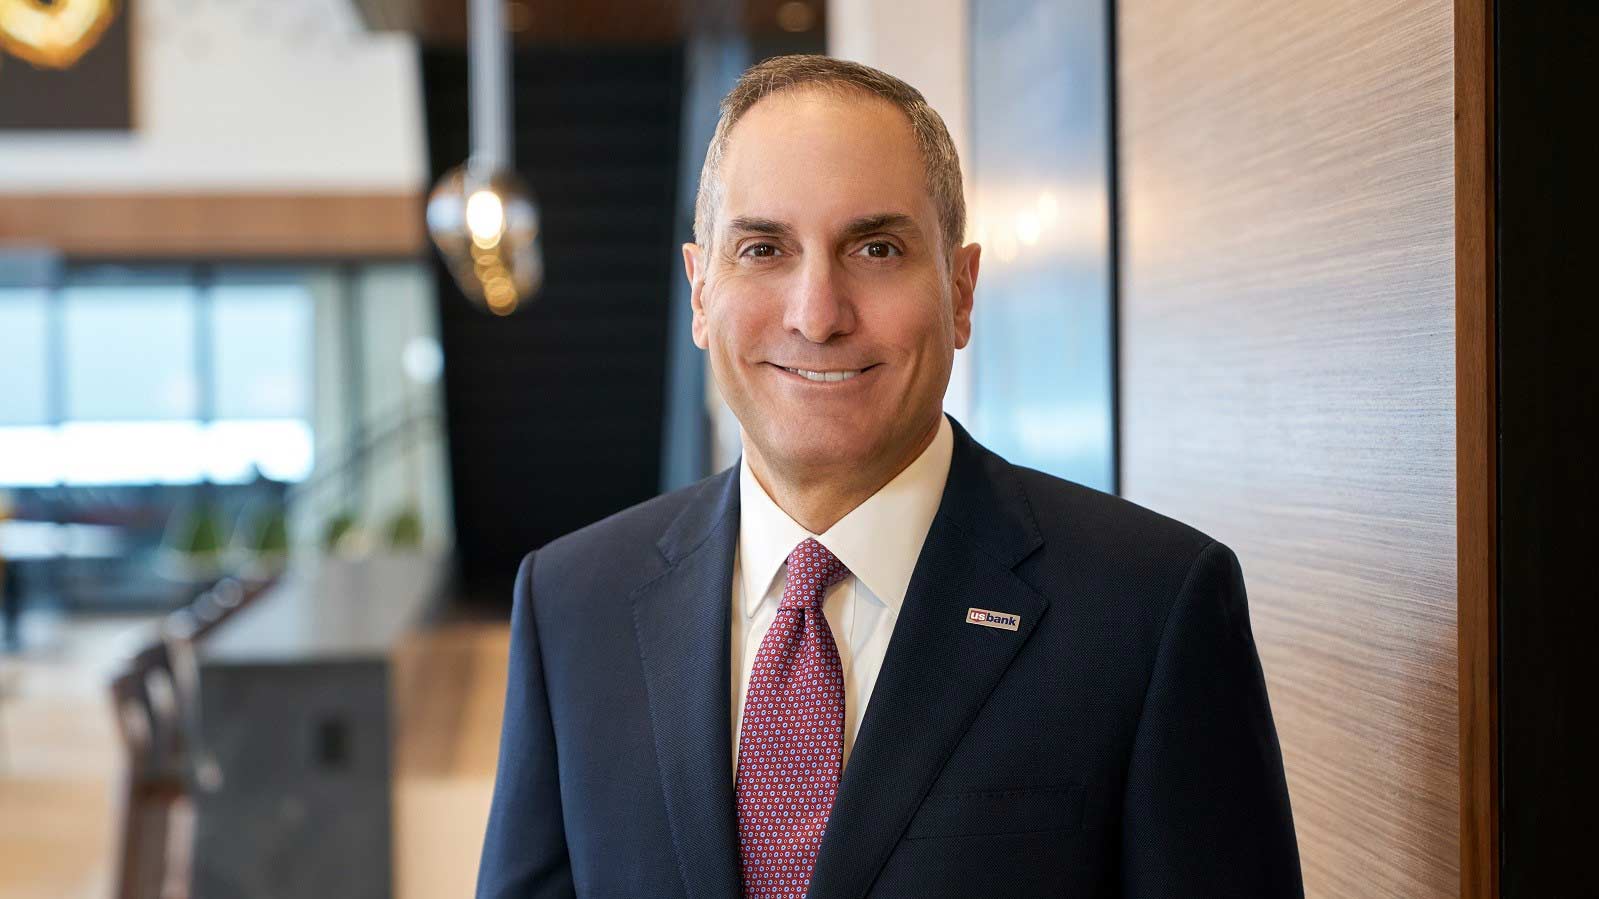 U.S. Bank CEO Andy Cecere smiling in an office environment